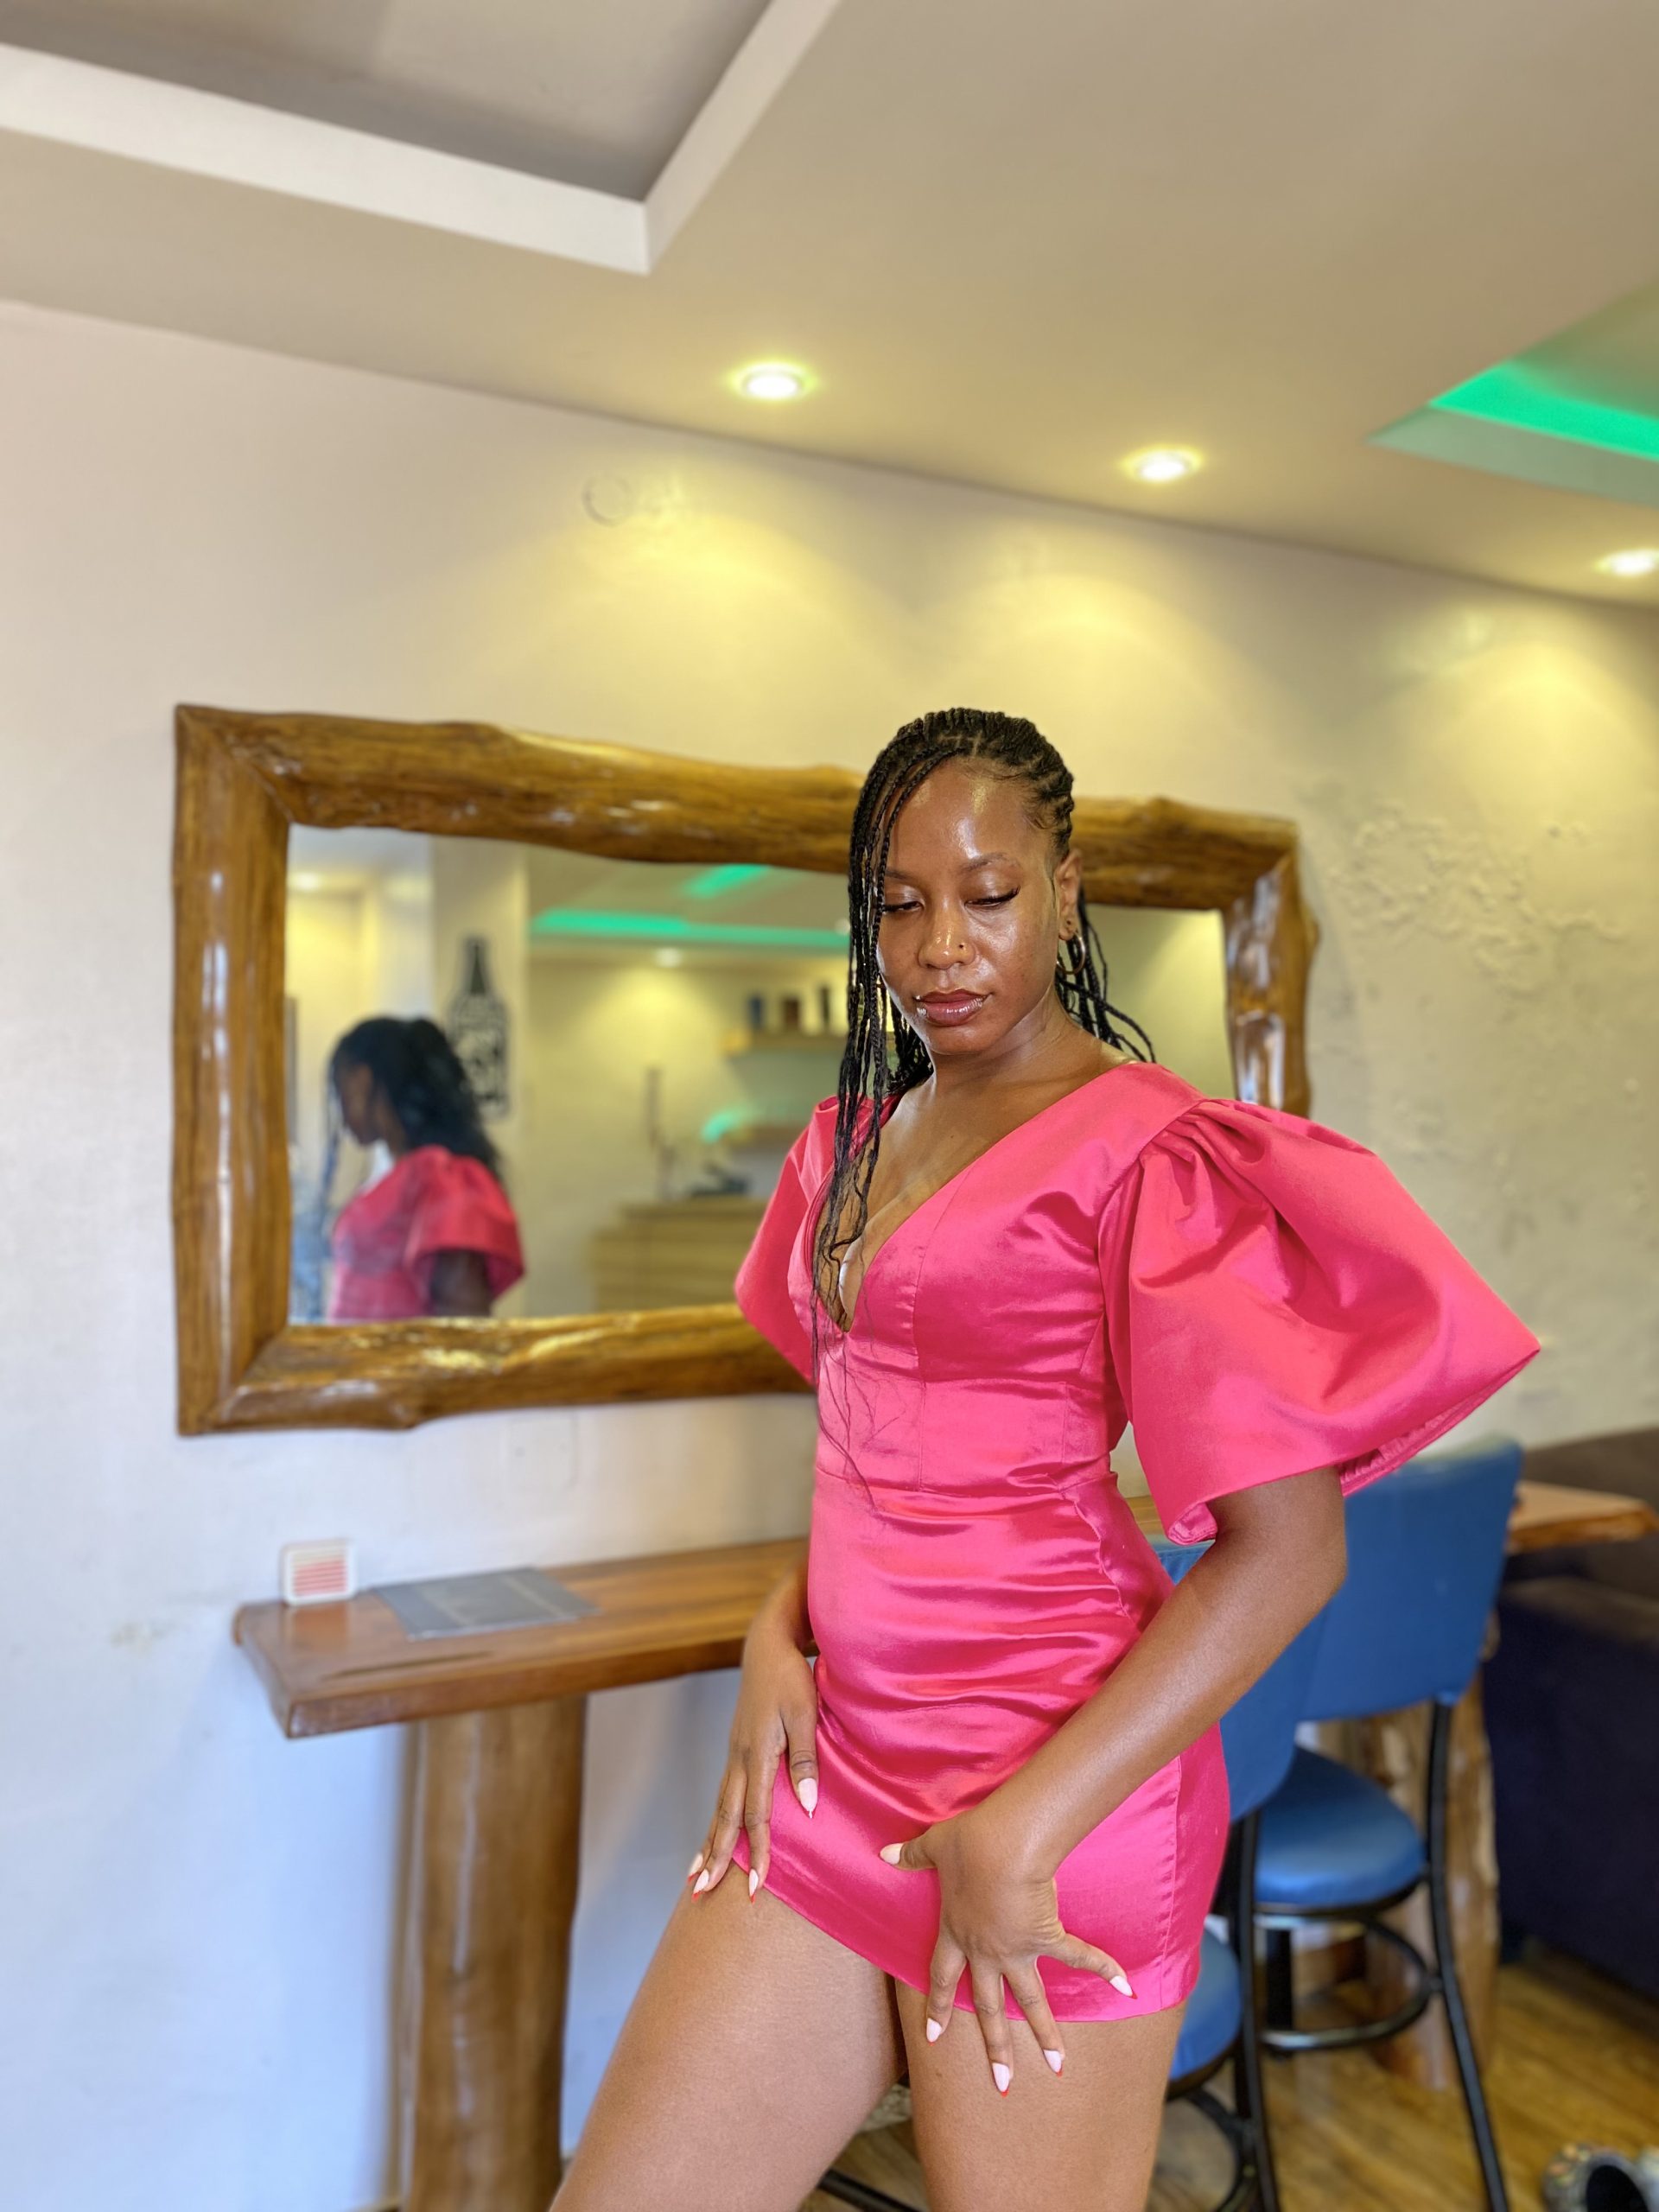 African Lady on pink gown made by fittedng